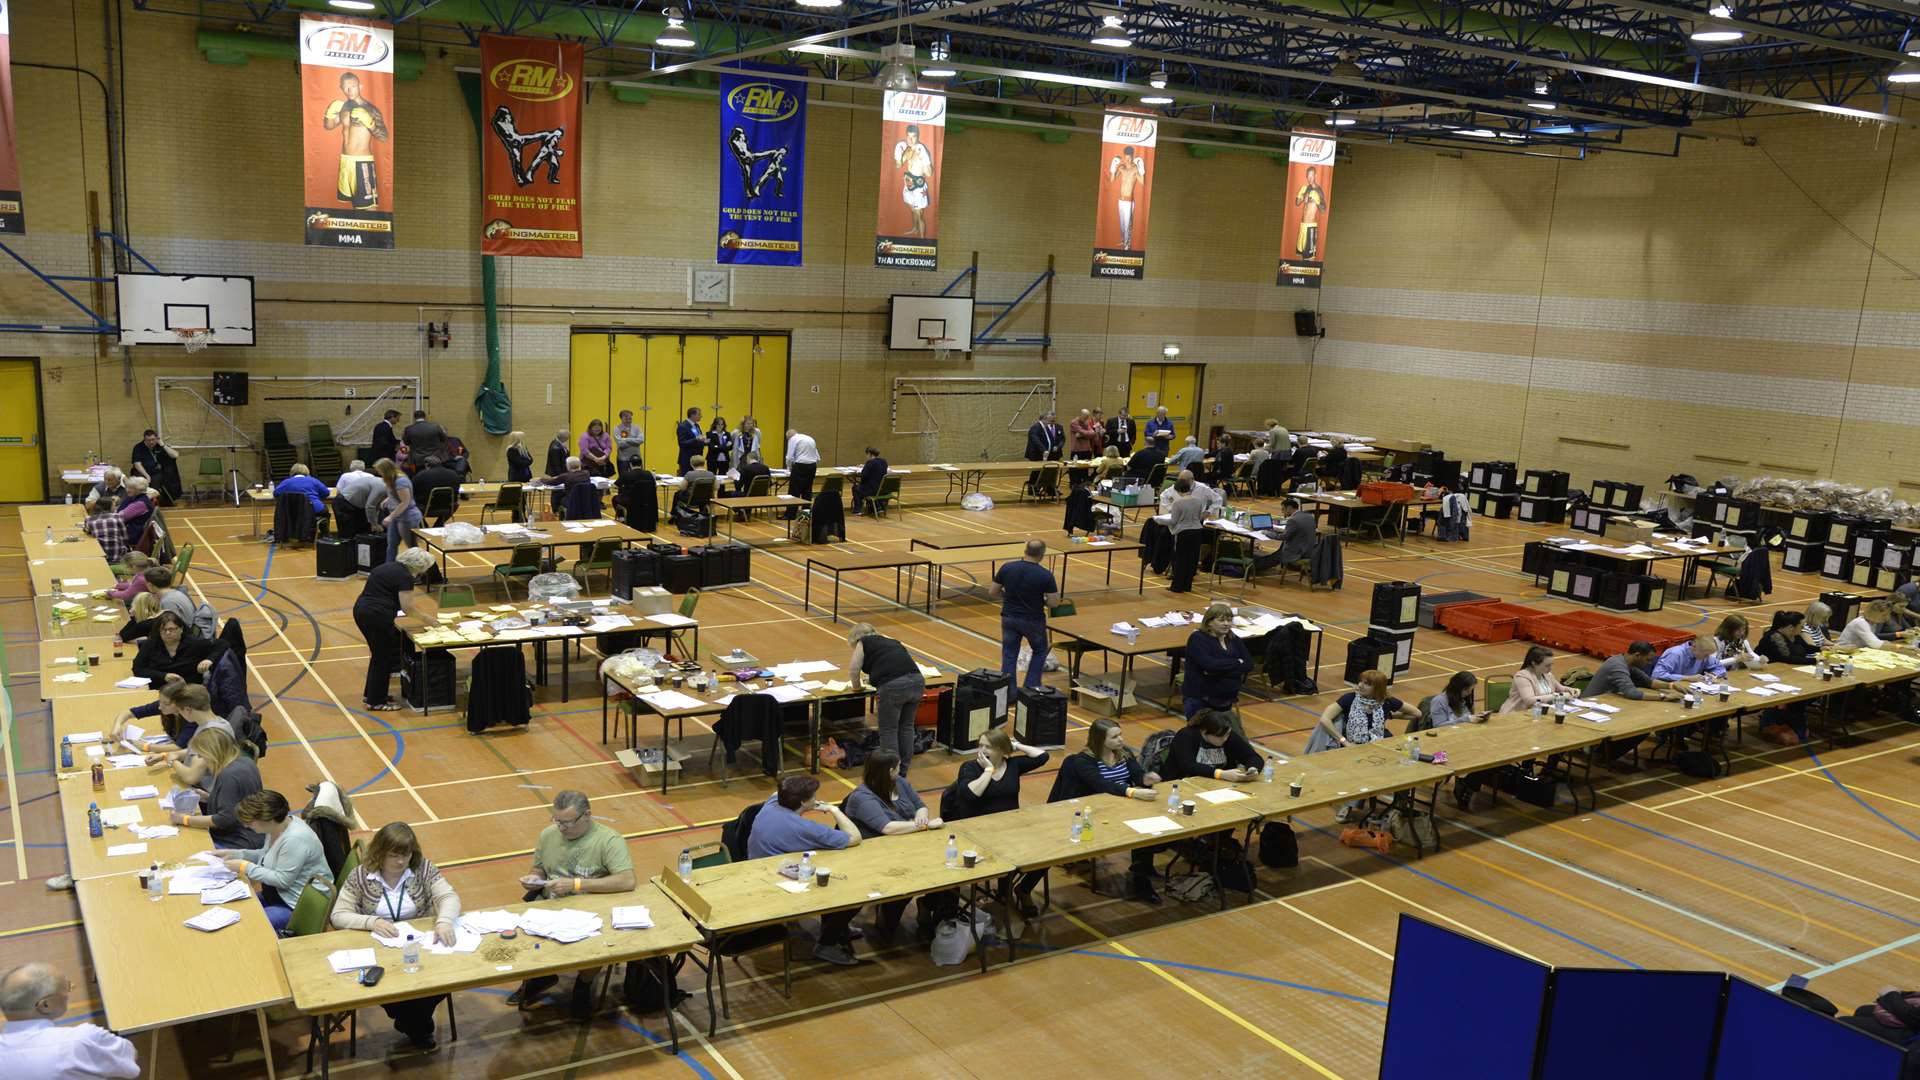 The count gets underway at Swallows Leisure Centre.